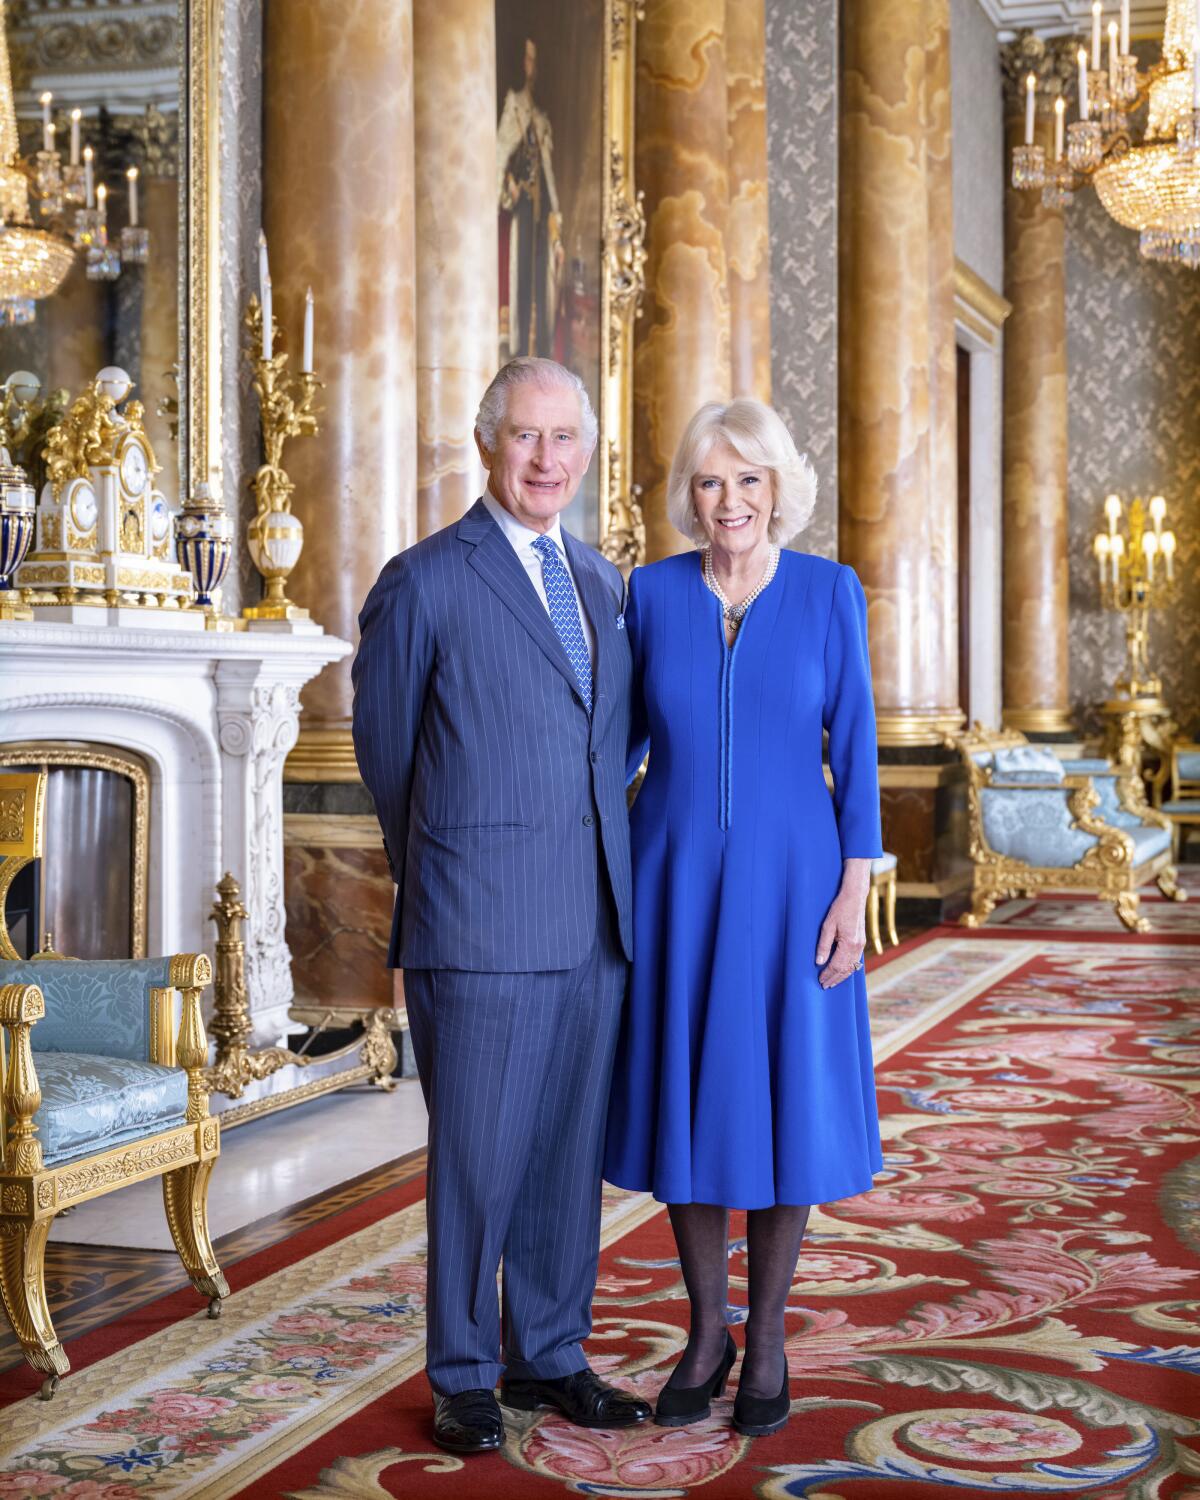 Britain's King Charles III and Queen Consort Camilla pose in the Blue Drawing Room at Buckingham Palace.